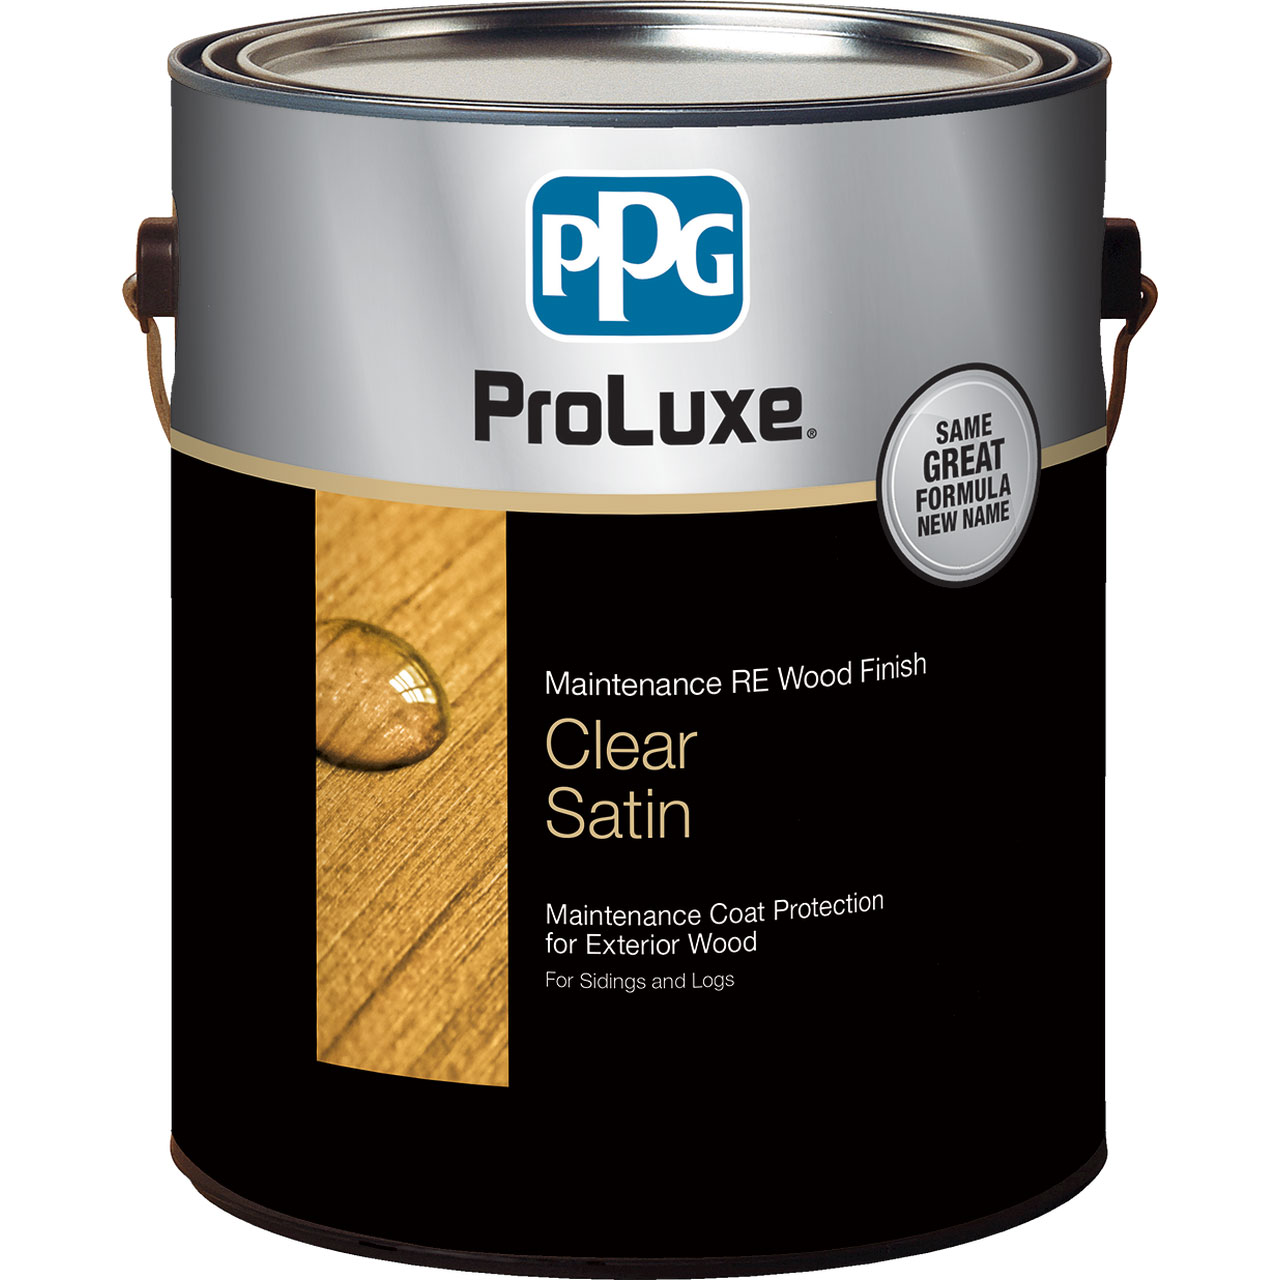 PPG Cetol Maintenance - Exterior Wood Stain - Clear Satin, 1 Gallon